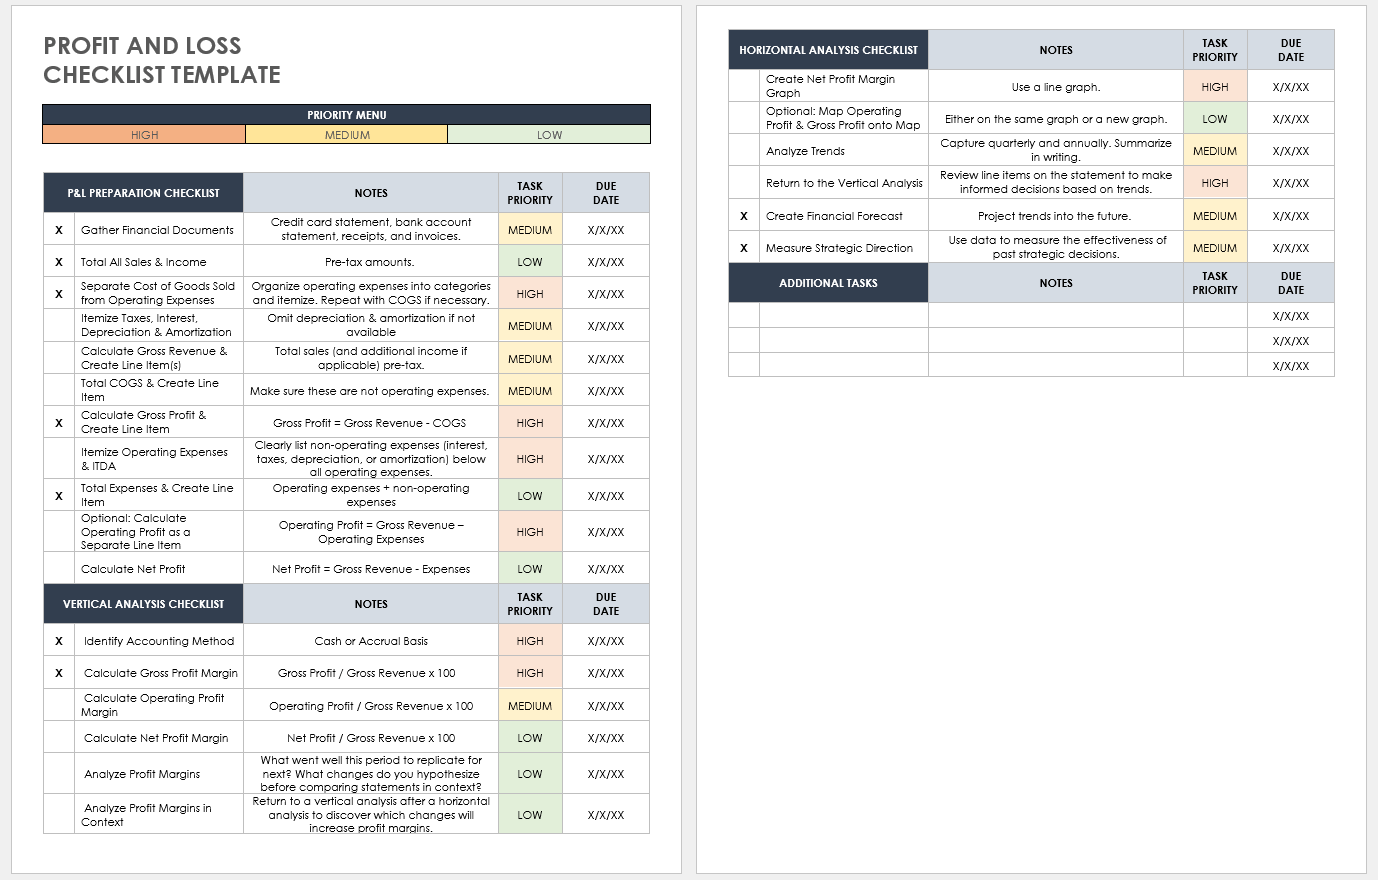 Profit and Loss Checklist Template